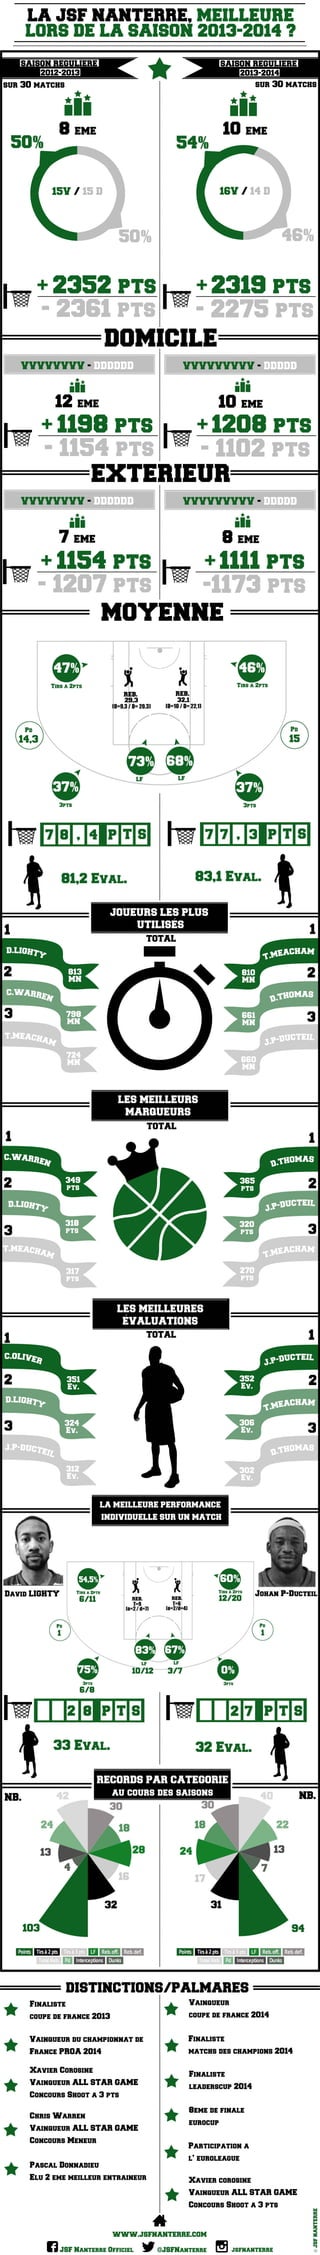 Infographie JSF Nanterre 2014